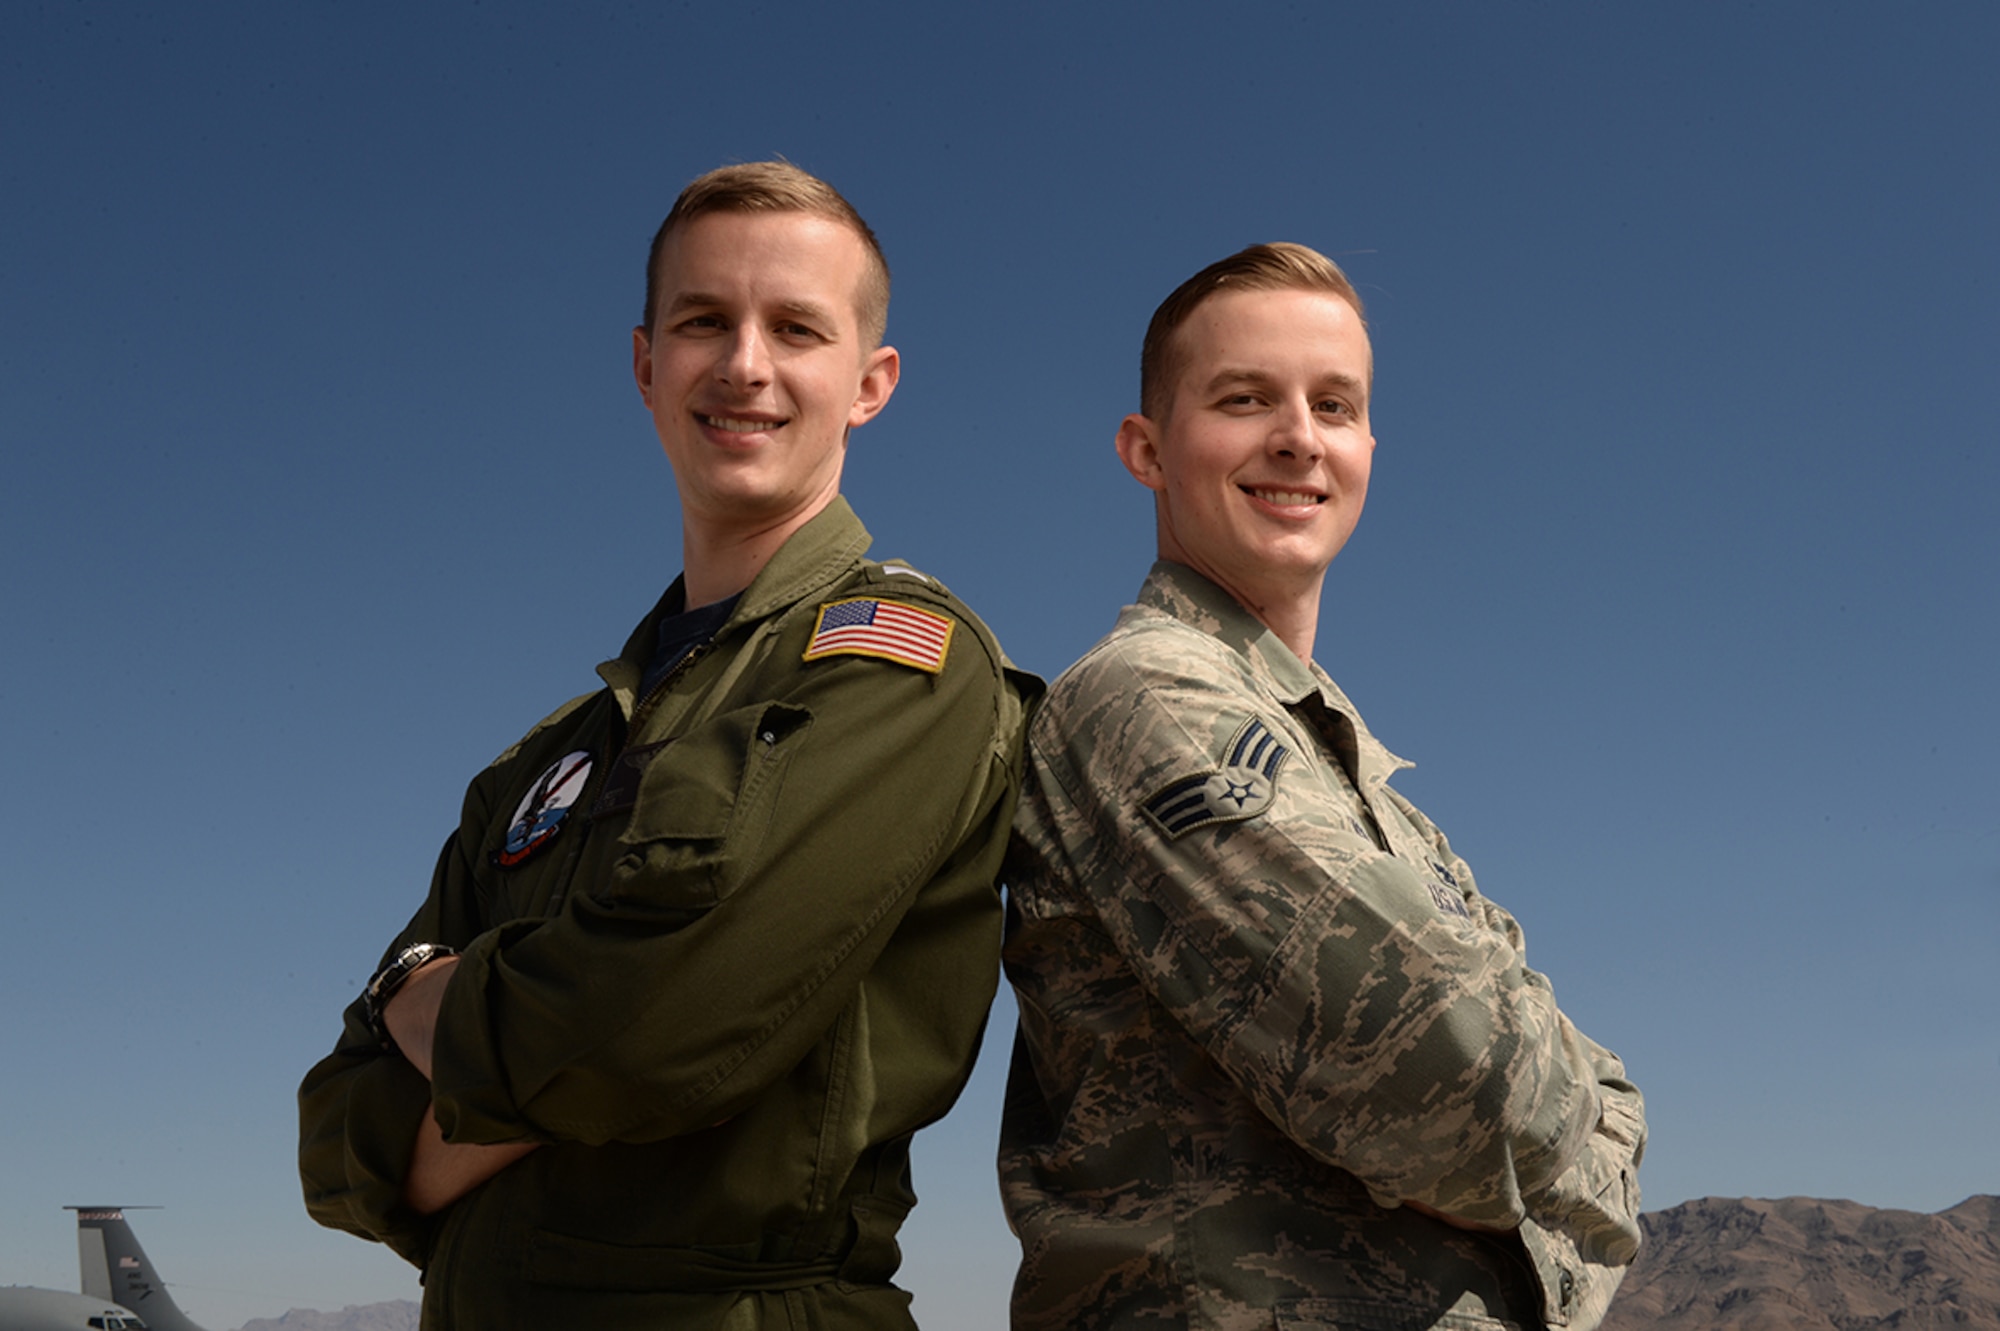 U.S. Navy LTJG Scott Russell and U.S. Air Force Senior Airman Brian Russell, reunite in uniform during Red Flag 15-2 at Nellis Air Force Base, Nevada, March 7, 2015. Brian is a KC-135 Stratotanker crew chief with the 22nd Maintenance Squadron at McConnell Air Force Base, Kansas, while Scott is a Navy Lieutenant junior grade and an EP-3E Aeries pilot with the Fleet Air Reconnaissance Squadron One at Naval Air Station Whidbey Island, Washington. (U.S. Air Force photo by/Staff Sgt. Vernon Young Jr.)